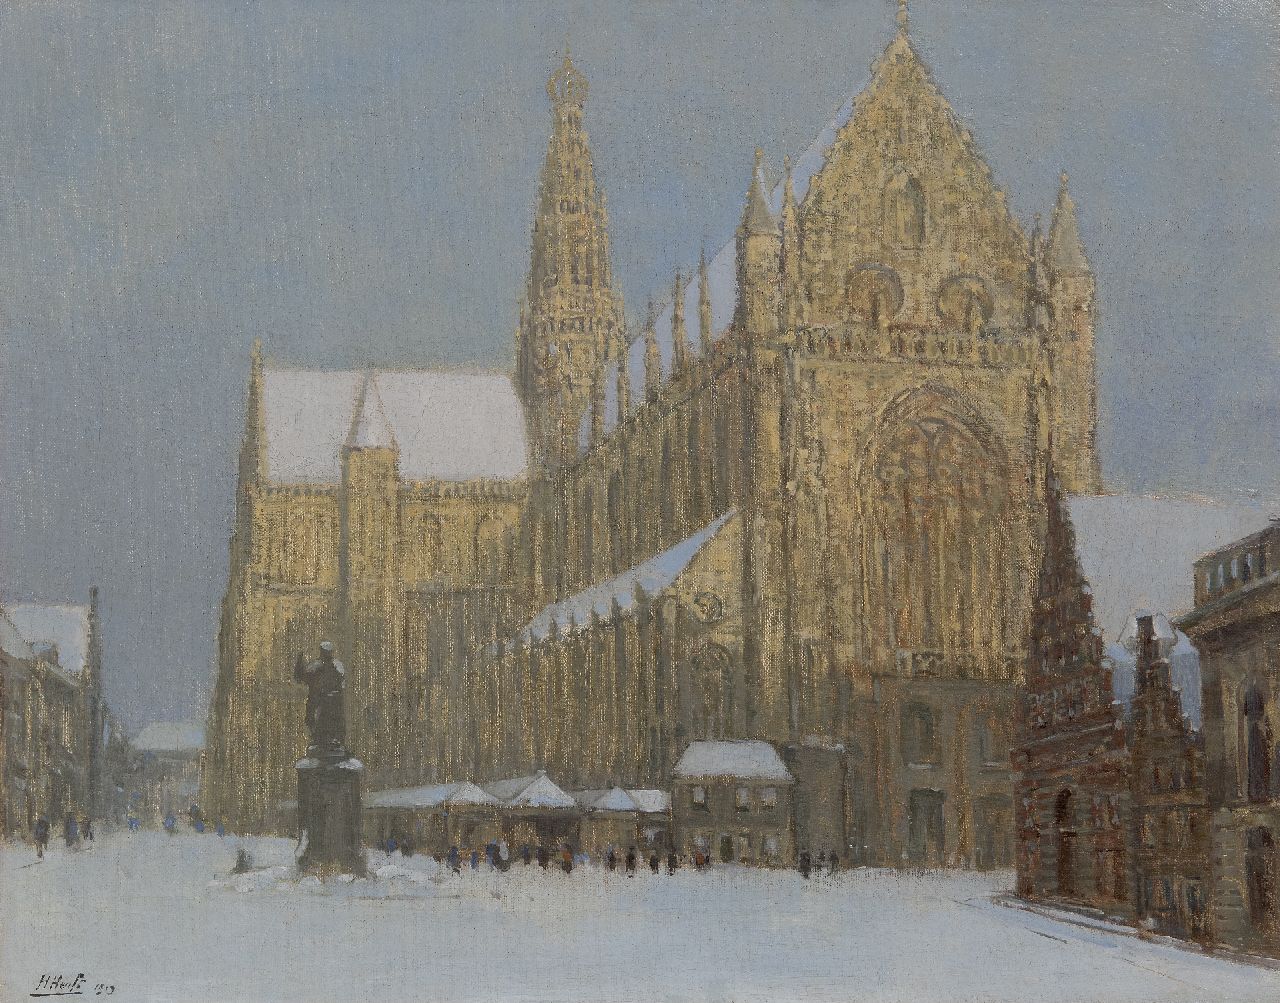 Heuff H.D.  | 'Herman' Davinus Heuff | Paintings offered for sale | The St. Bavokerk in Haarlem in winter, oil on canvas 49.3 x 63.2 cm, signed l.l. and dated 1919